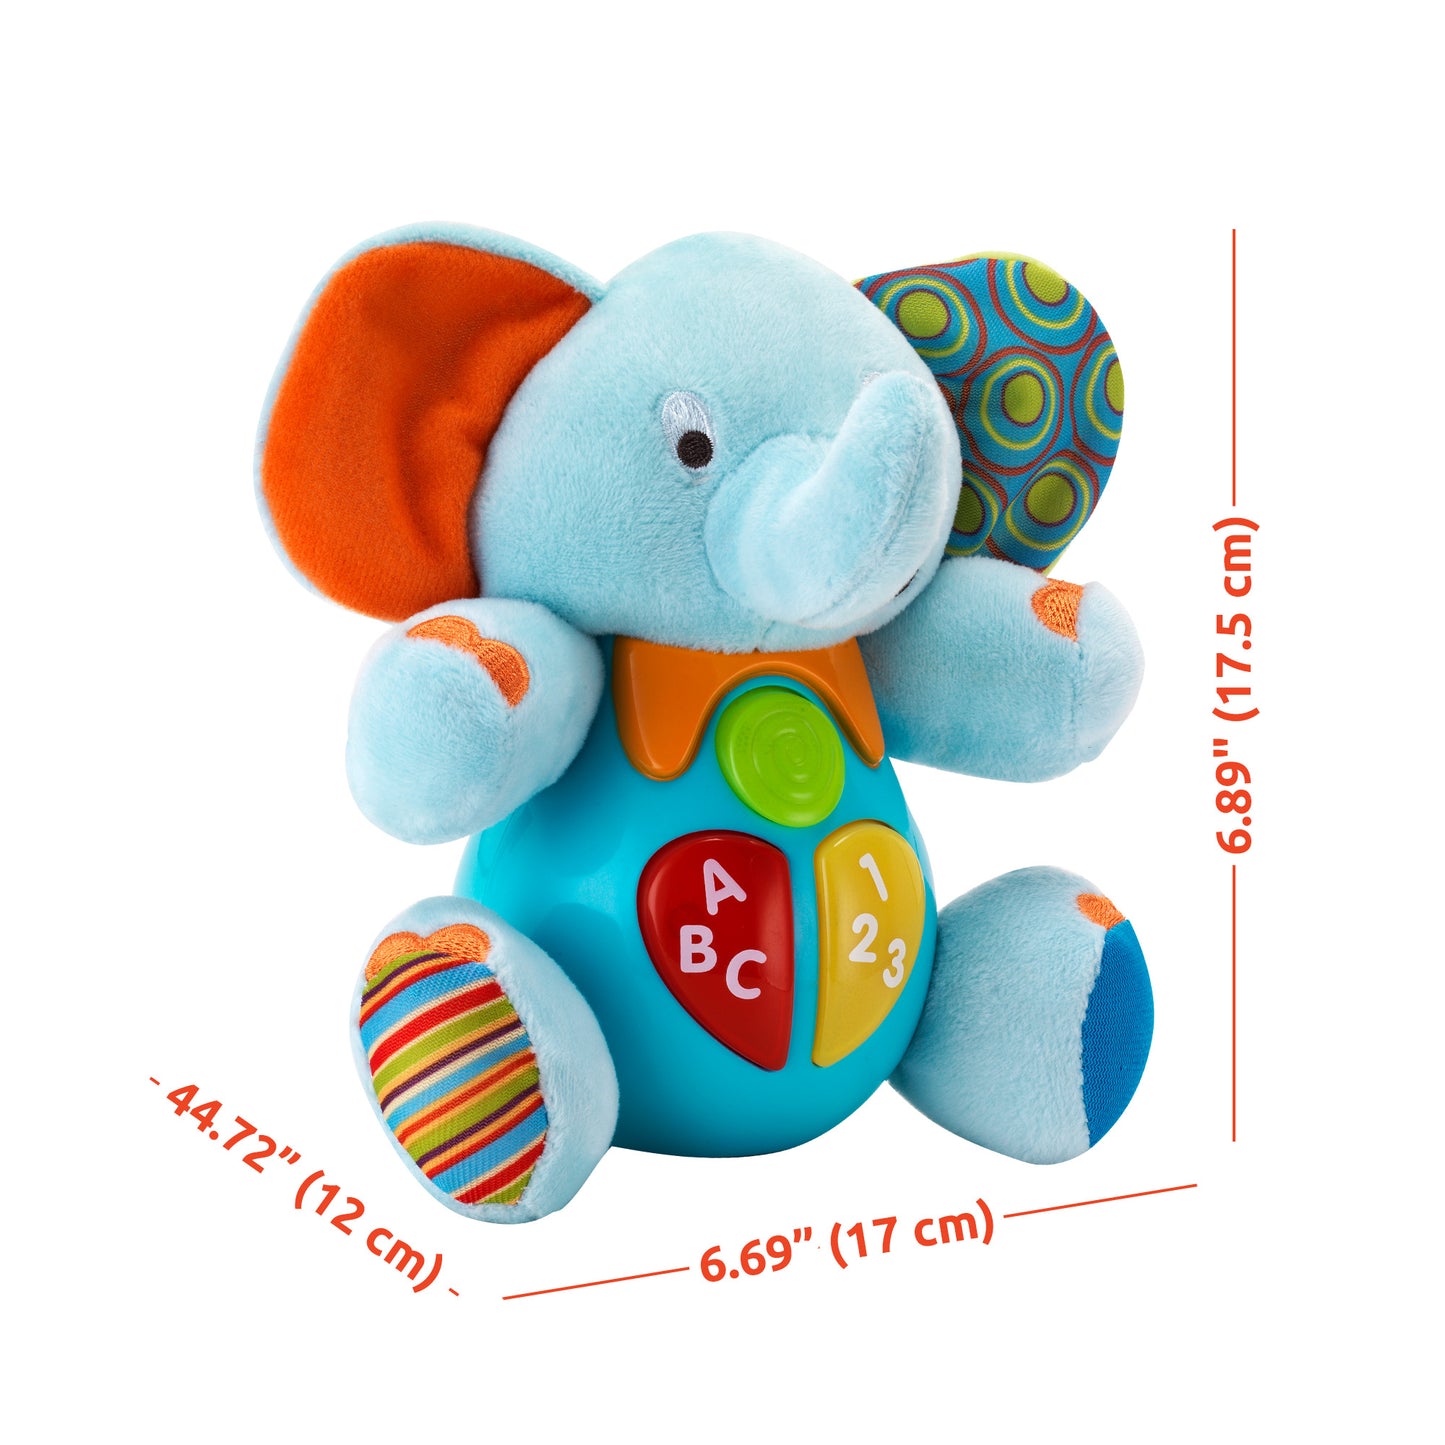 KiddoLab Plush Elephant Baby Toys - Musical Stuffed Animals with 3 Light-Up Buttons, 4 Children's Nursery Songs & Sound Effects - Soft Learning Toy for 3 Months & Olds Infants, Babies & Toddlers